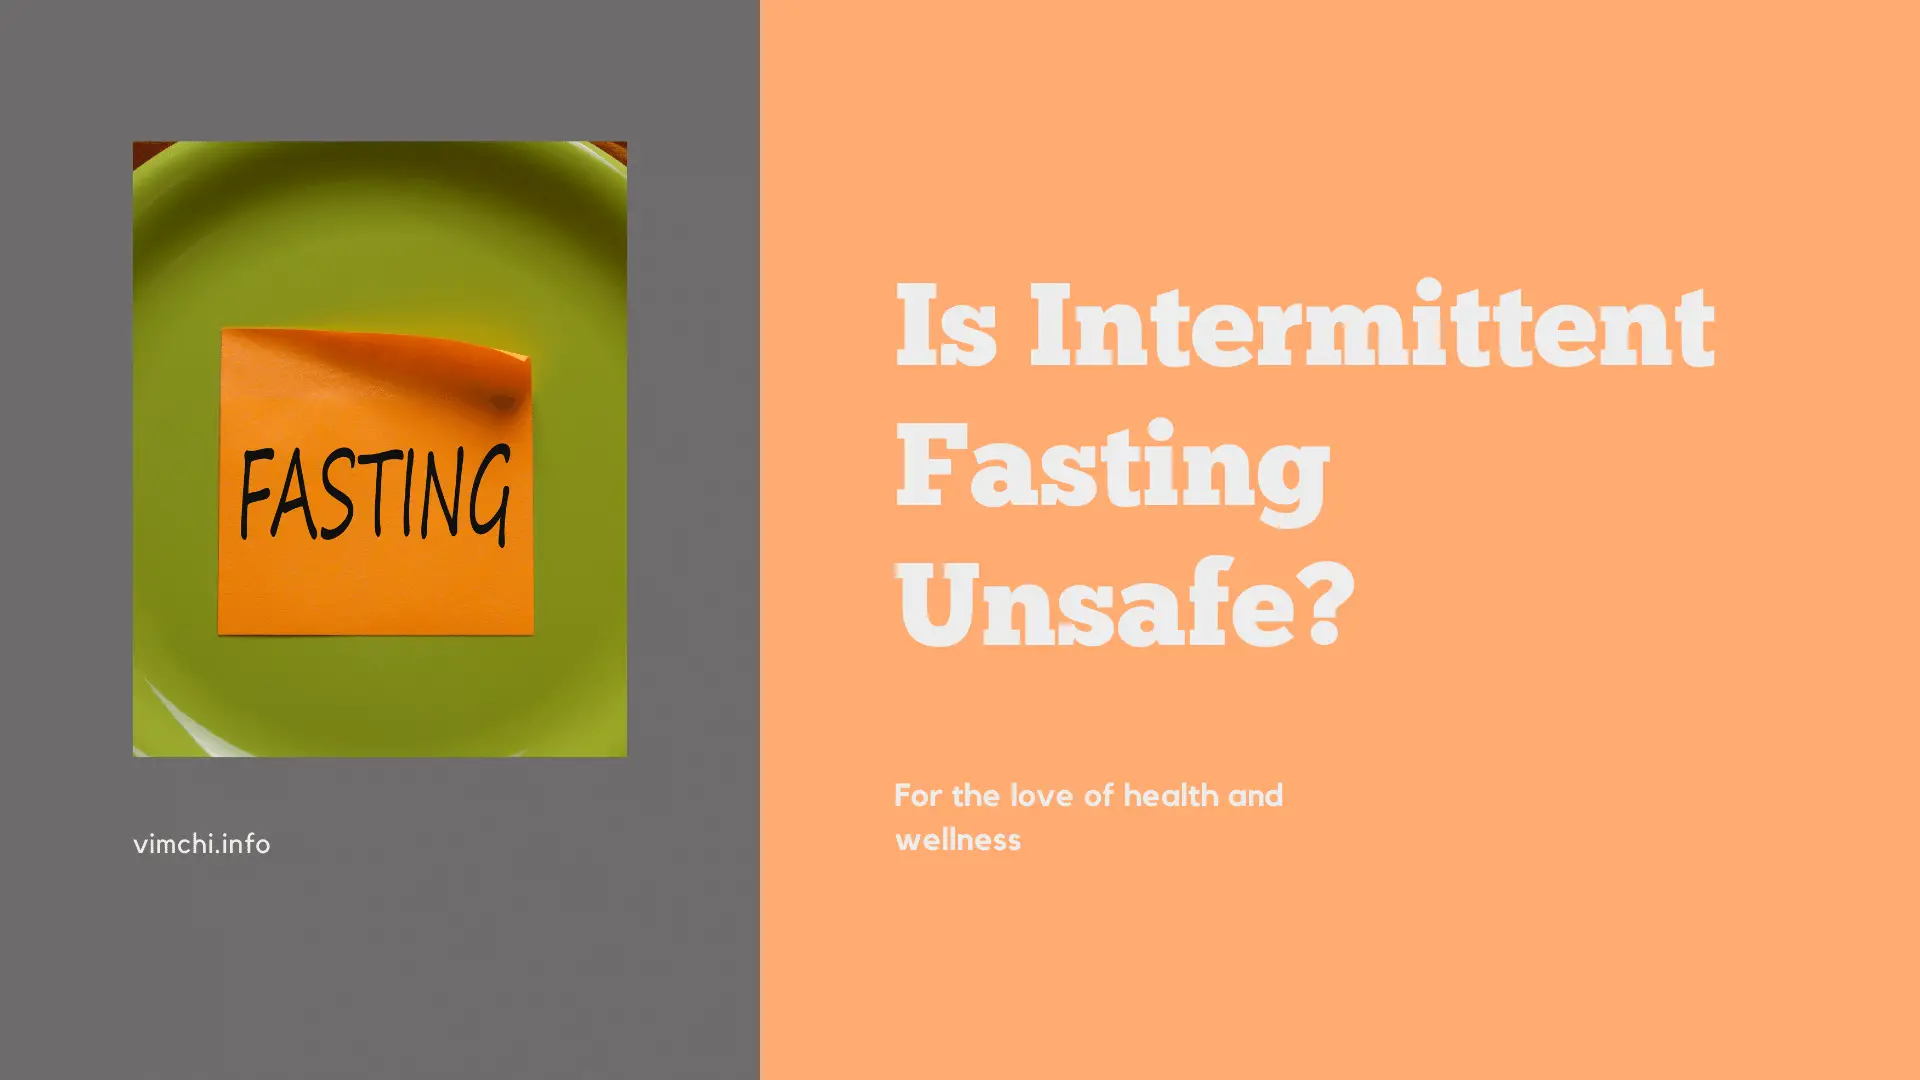 is intermittent fasting unsafe